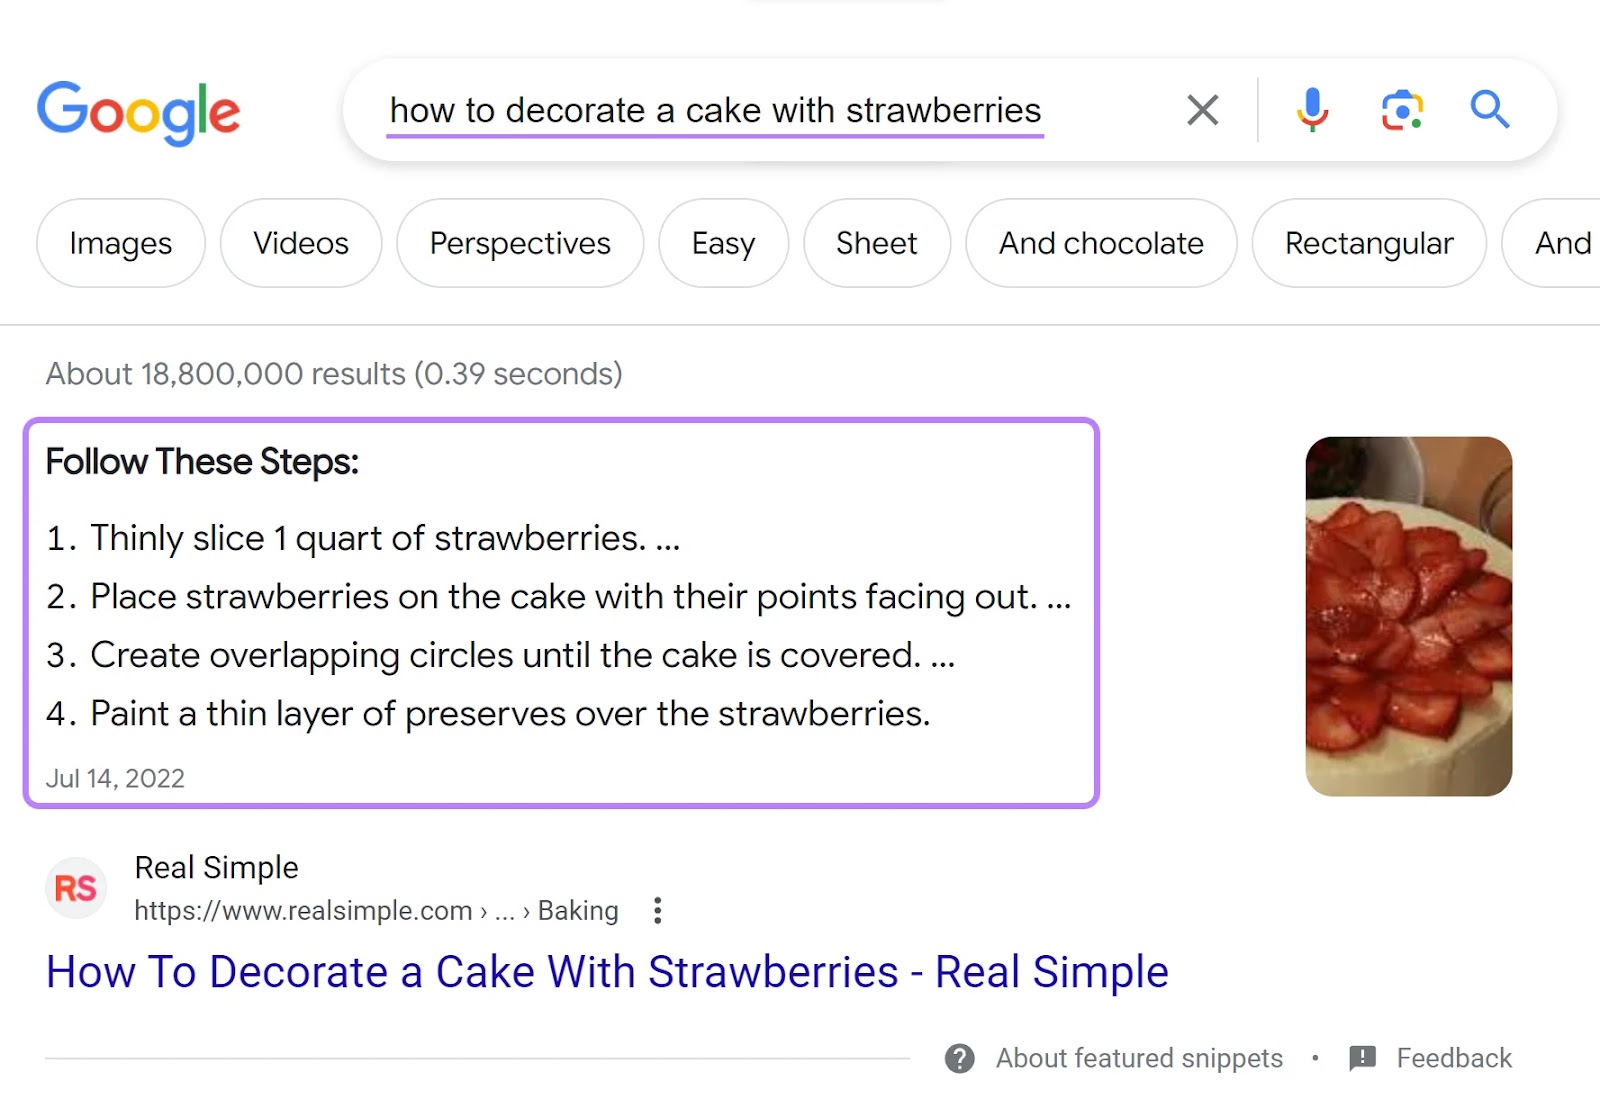 Google's featured snippet for "how to decorate a cake with strawberries" query